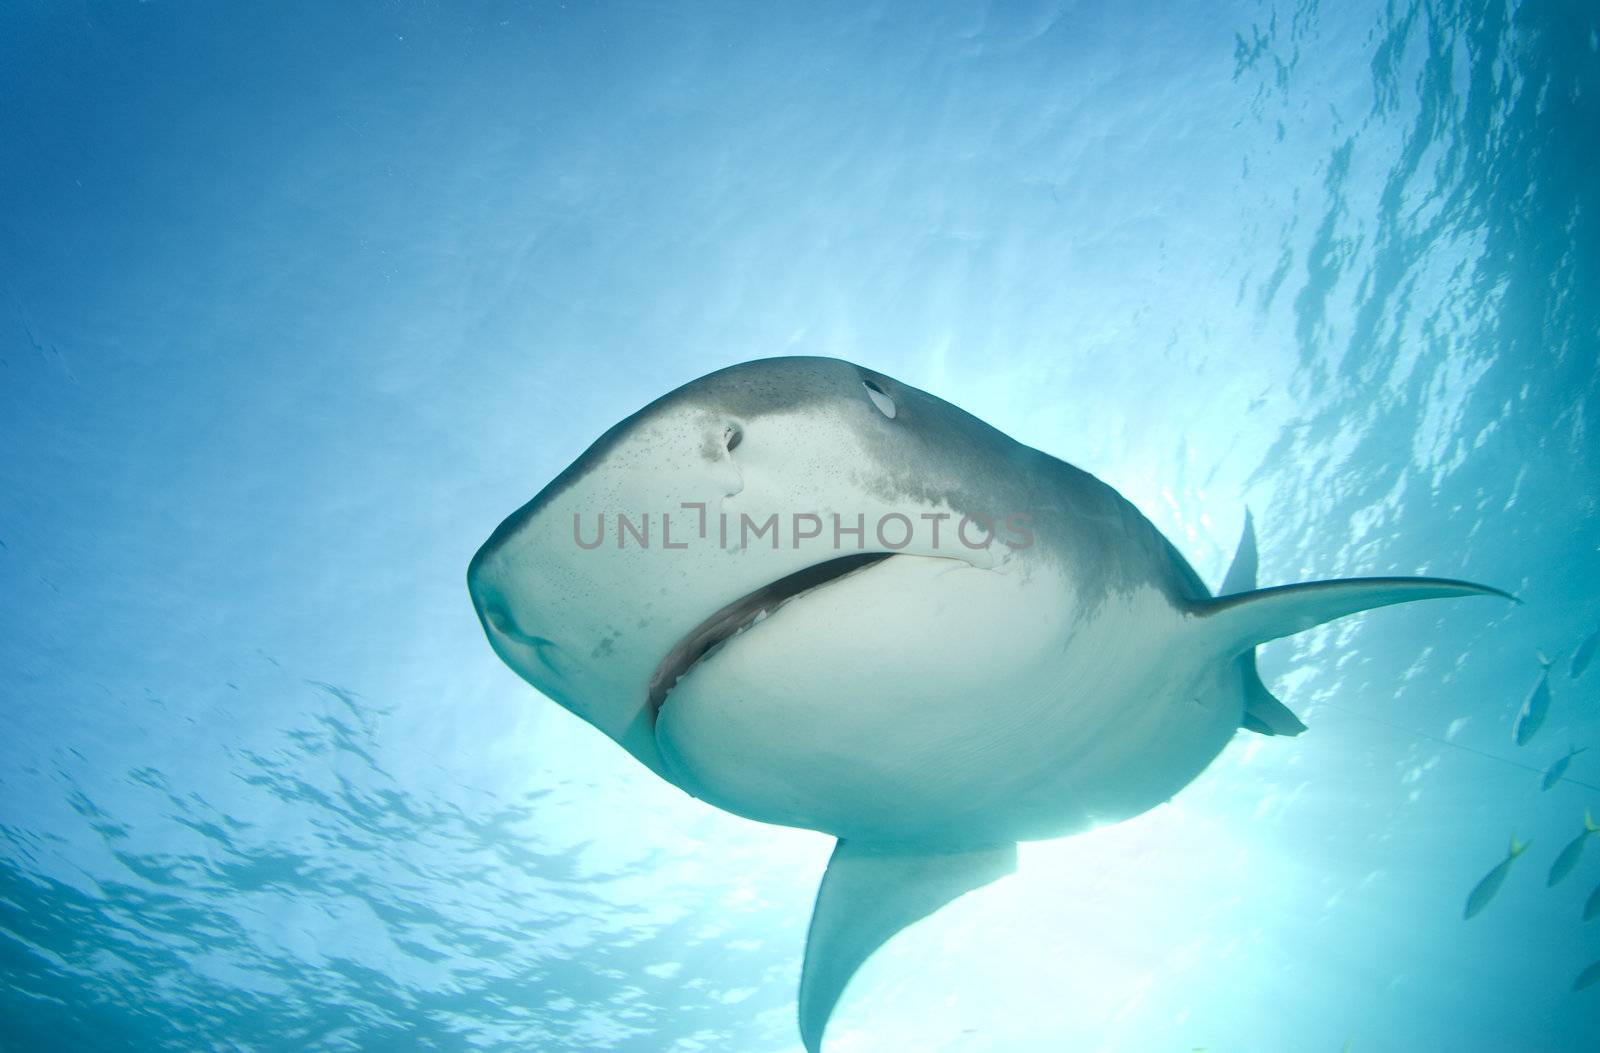 A Tiger Shark (Galeocerdo cuvier) begins to cover her eyes as she descends towards the camera from above in line with the sun shining through the surface of the ocean.